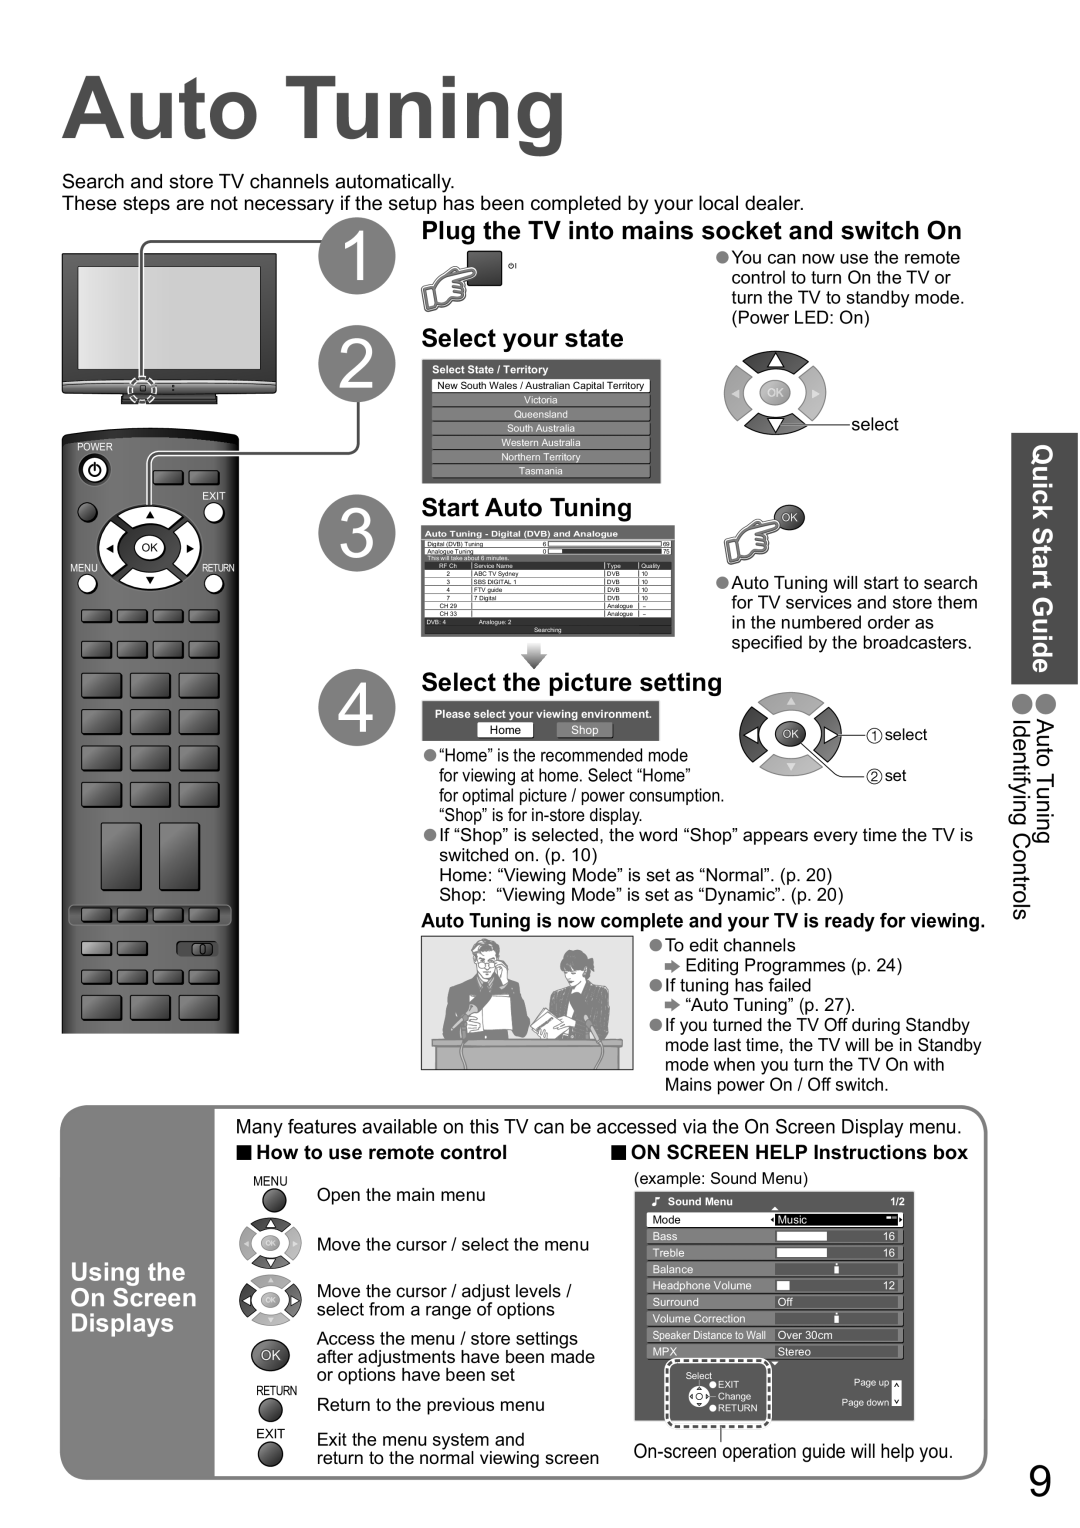 Panasonic TX-32LXD8A manual Select your state, Quick Start Guide, Select the picture setting, Start Auto Tuning 